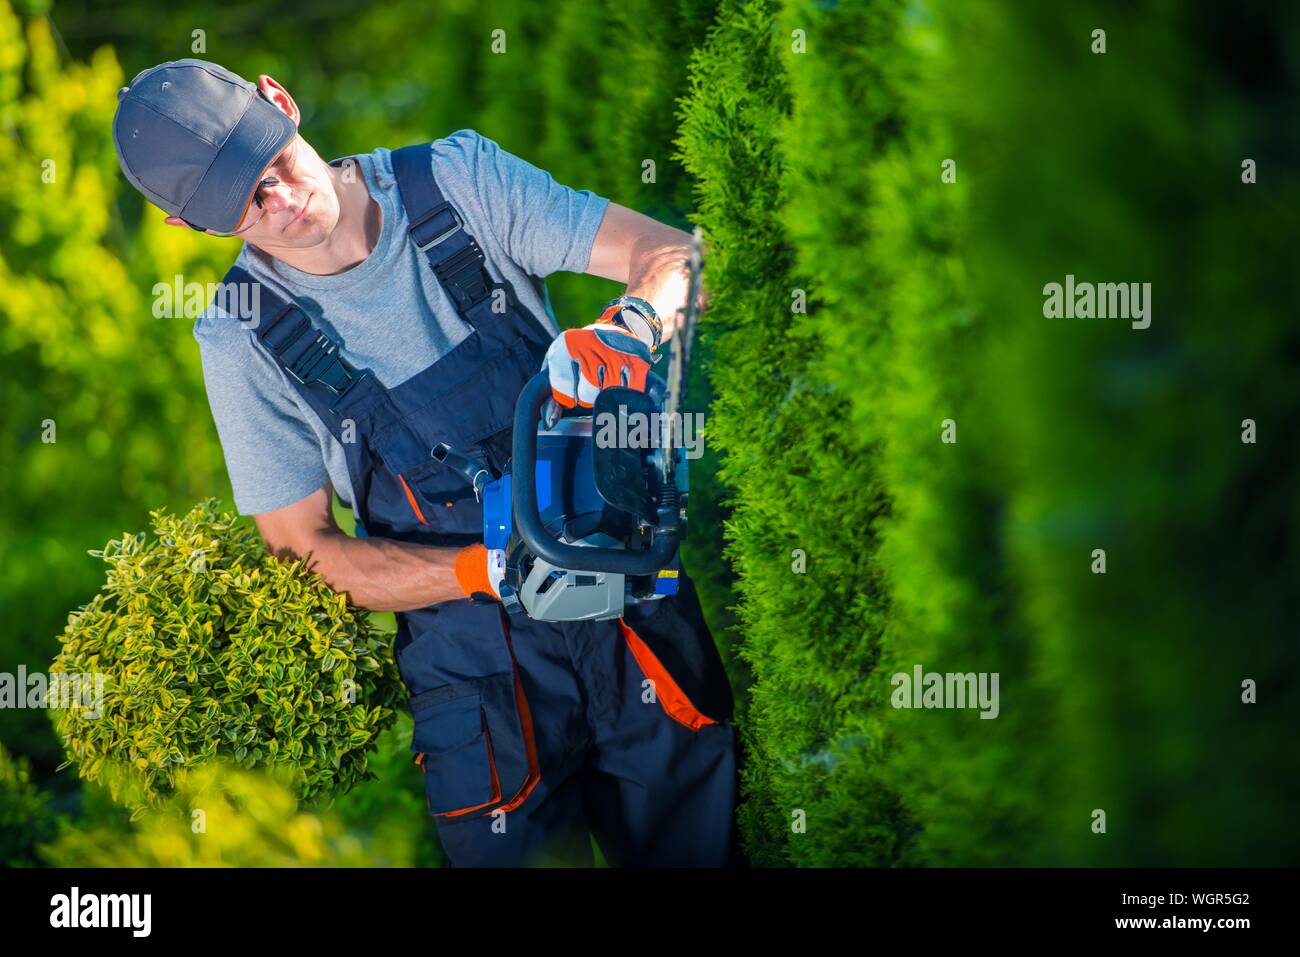 Manual Worker Outdoors Stock Photo